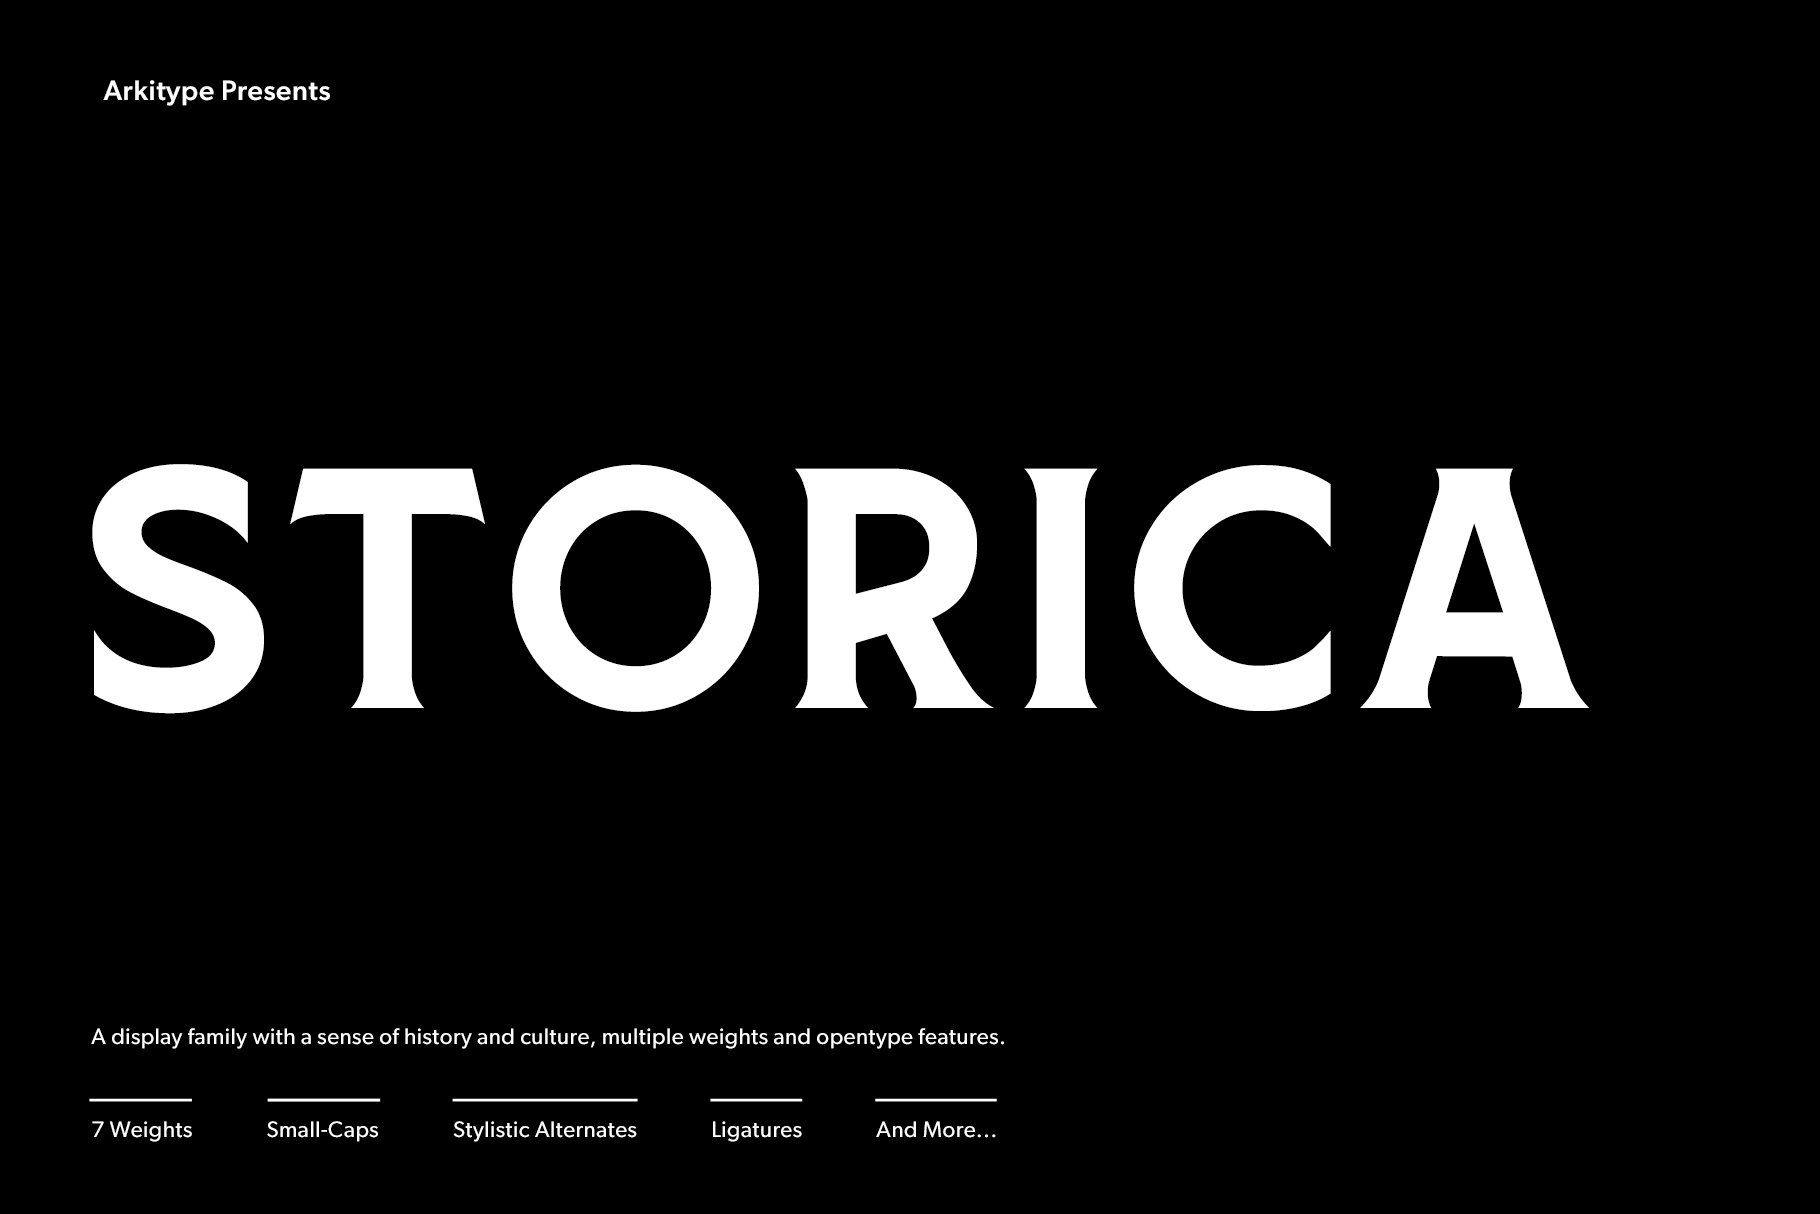 Storica cover image.